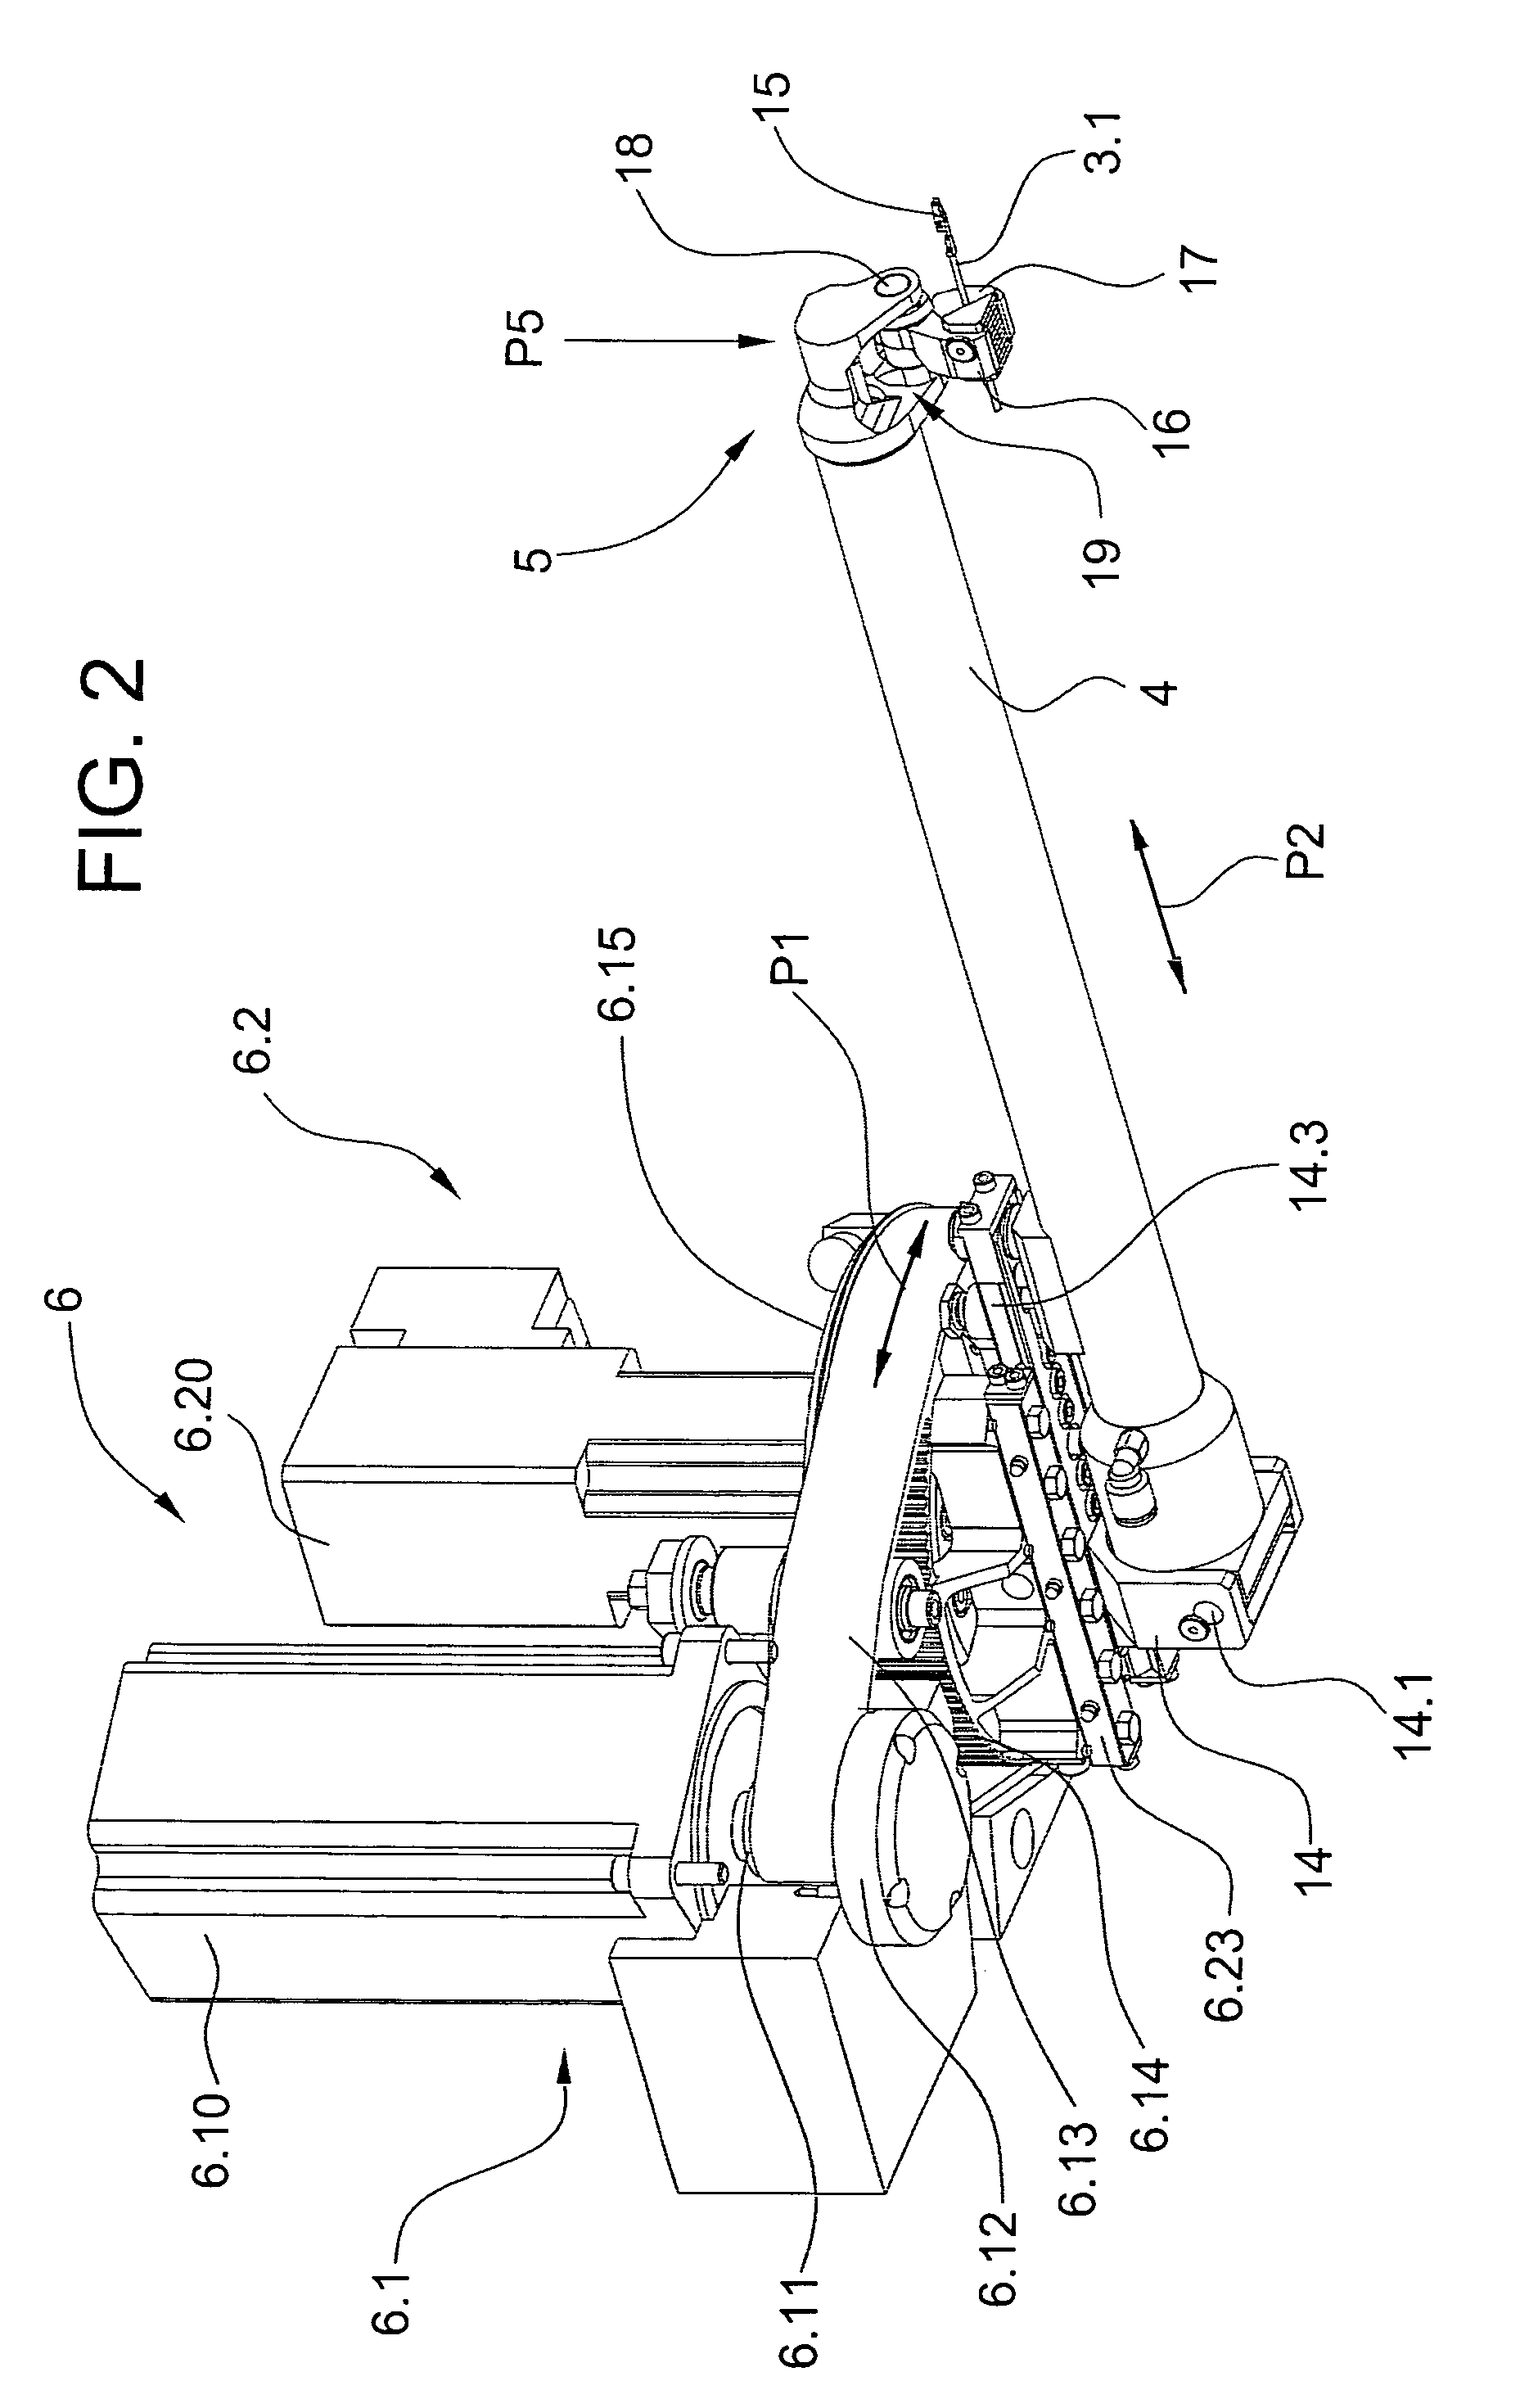 Inspection apparatus for wire-processing machine